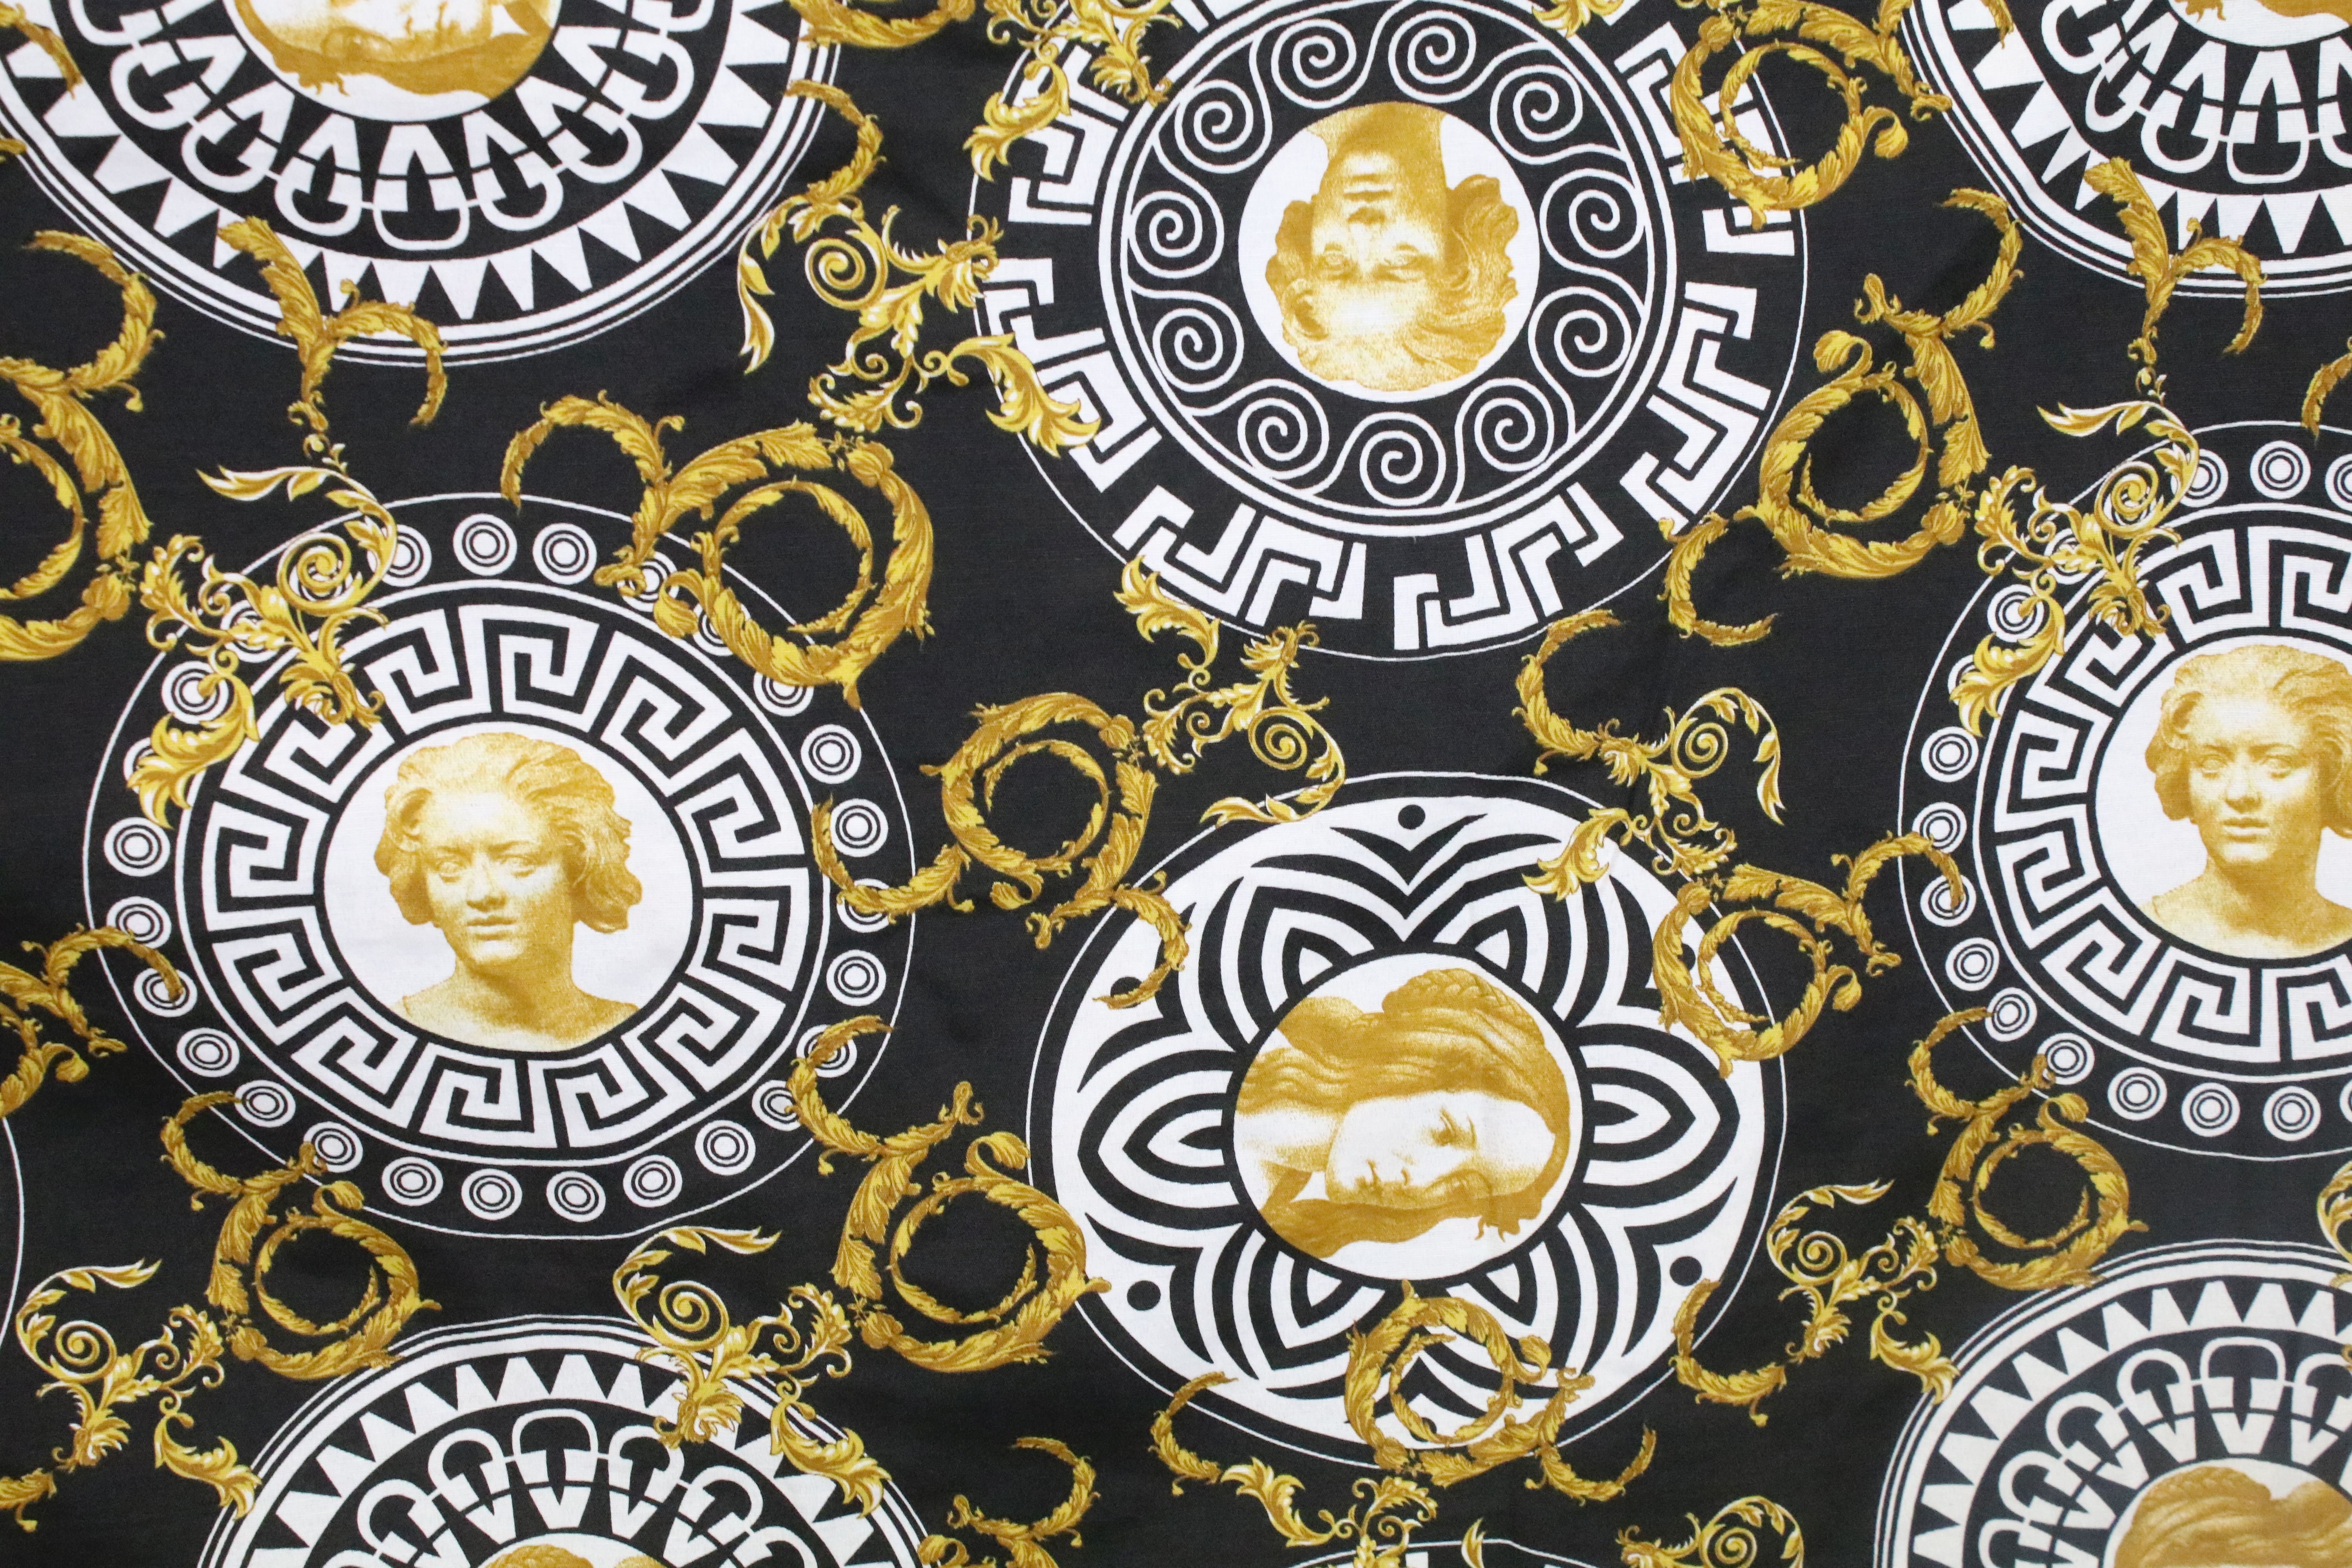 Large piece of black ground Versace style fabric, with repeating spiralling gold acanthus leaves - Image 3 of 5